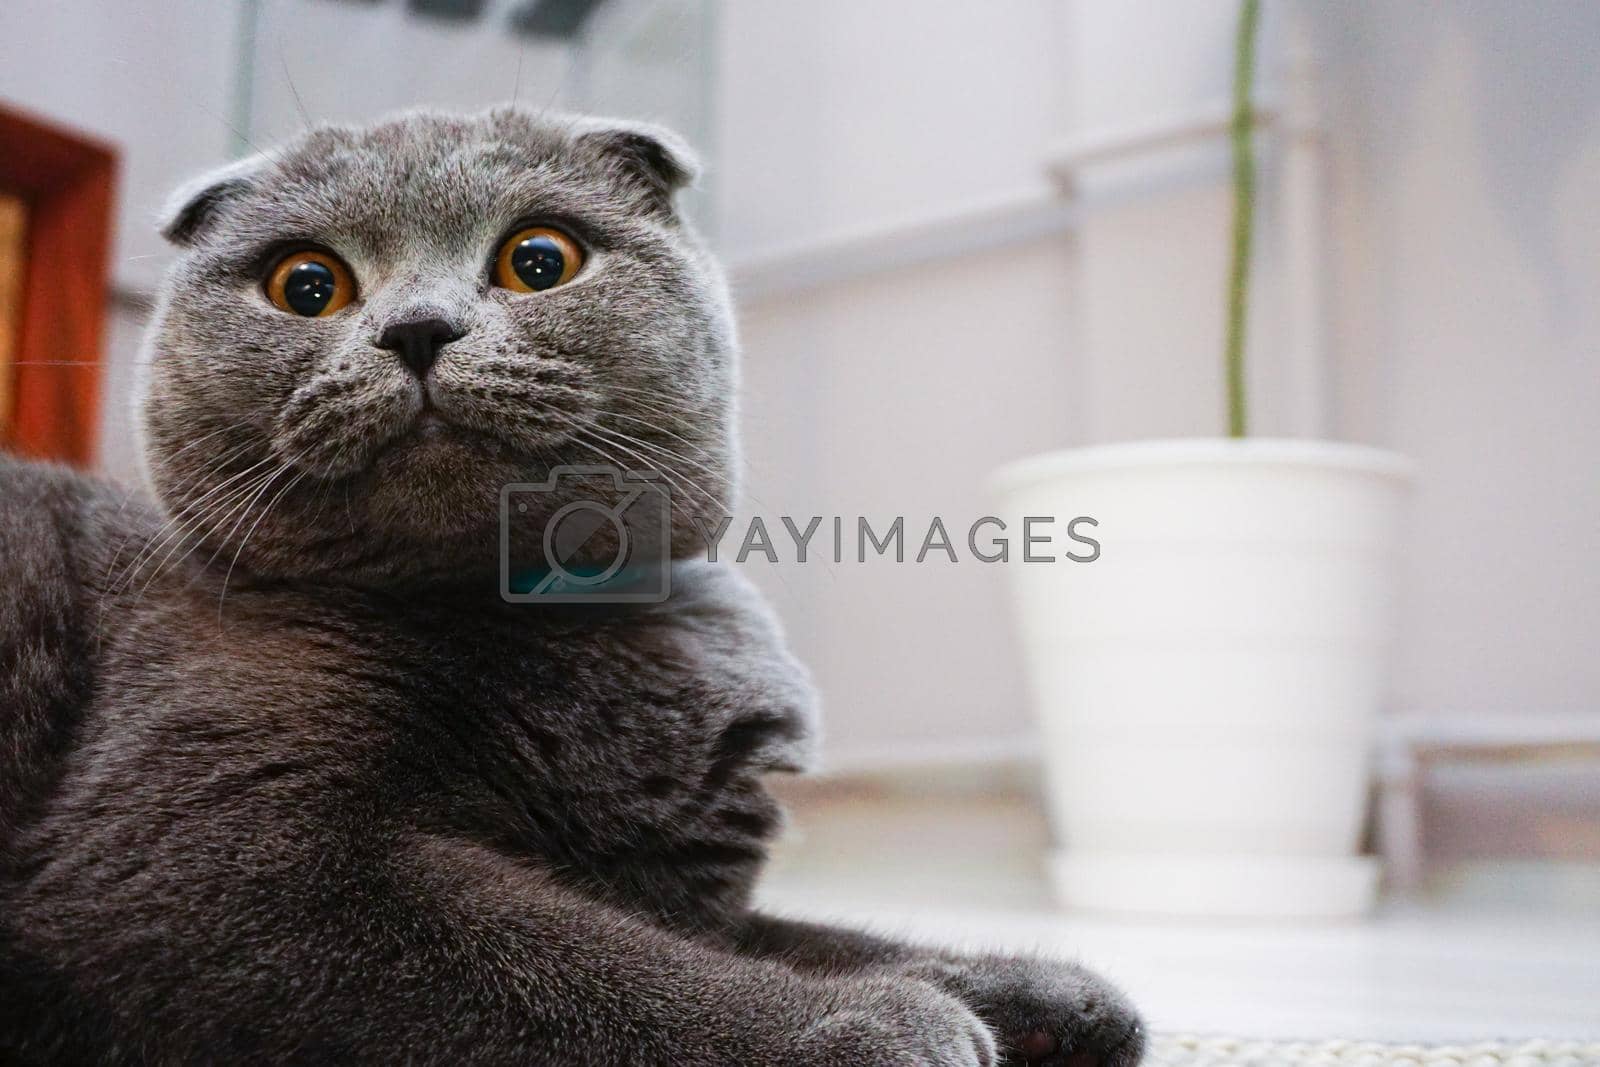 Royalty free image of Cute scottish fold cat with amber eyes looking at camera by tasci